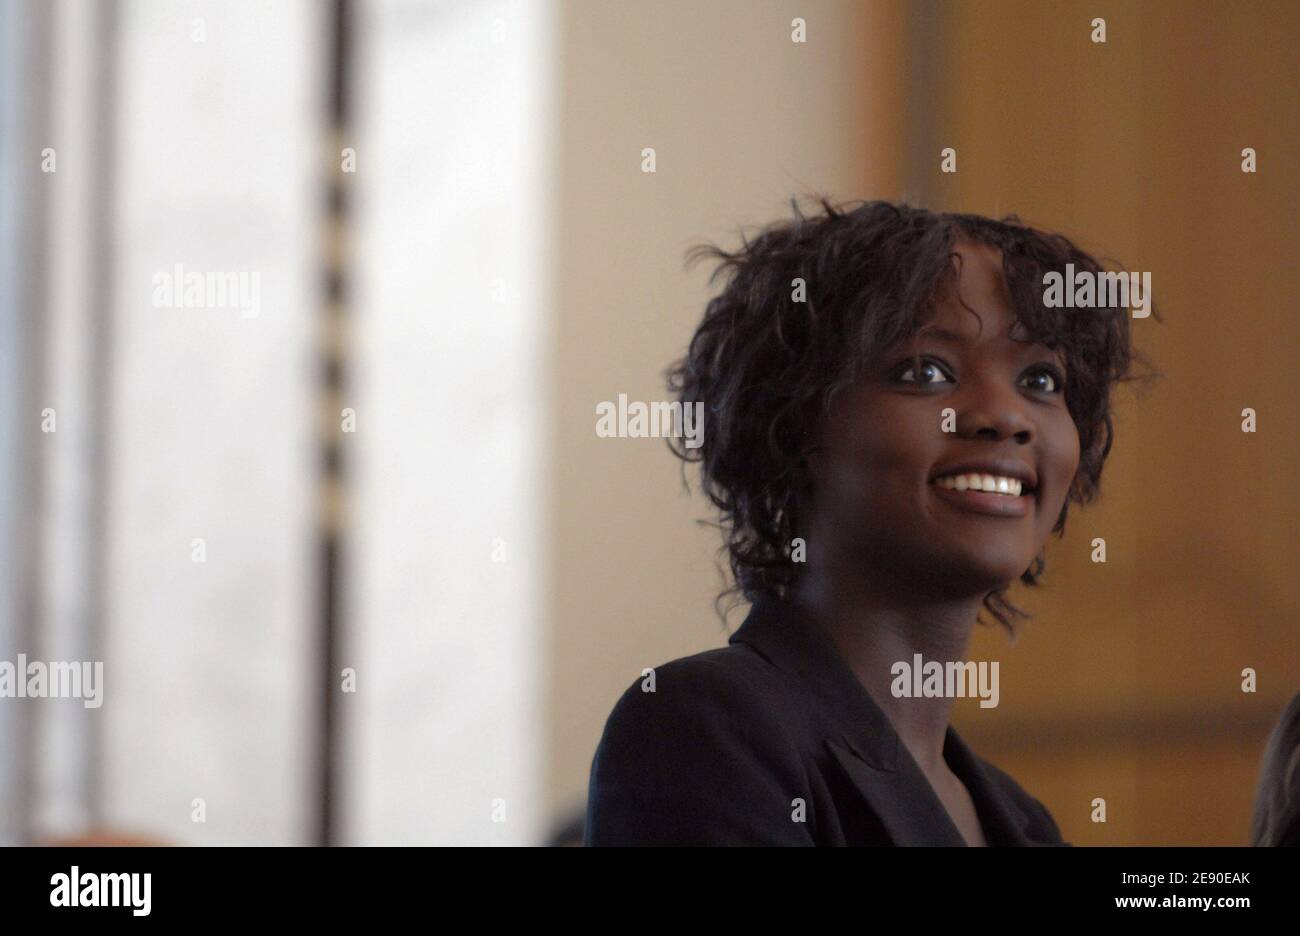 Rama Yade attends a commercial agreement signing ceremony in Algiers, Algeria on December 4, 2007. Photo by Christophe Guibbaud/ABACAPRESS.COM Stock Photo